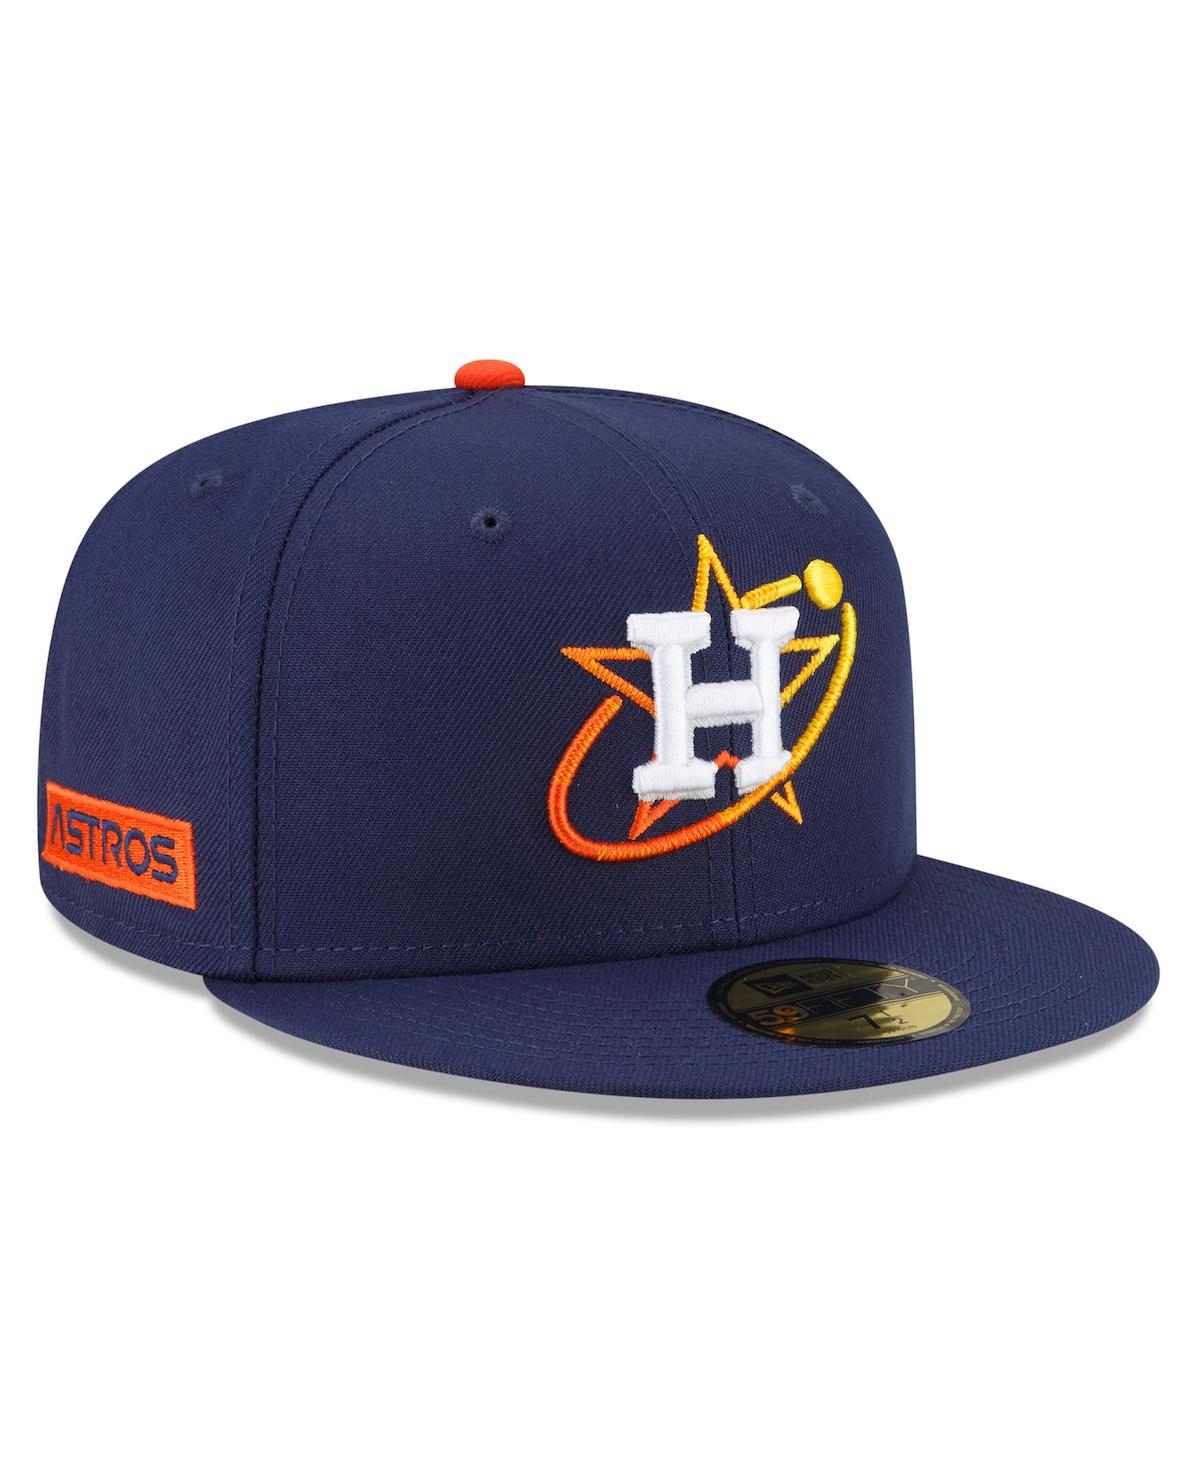 Men's New Era White/Black Houston Astros Cooperstown Collection 59FIFTY  Fitted Hat